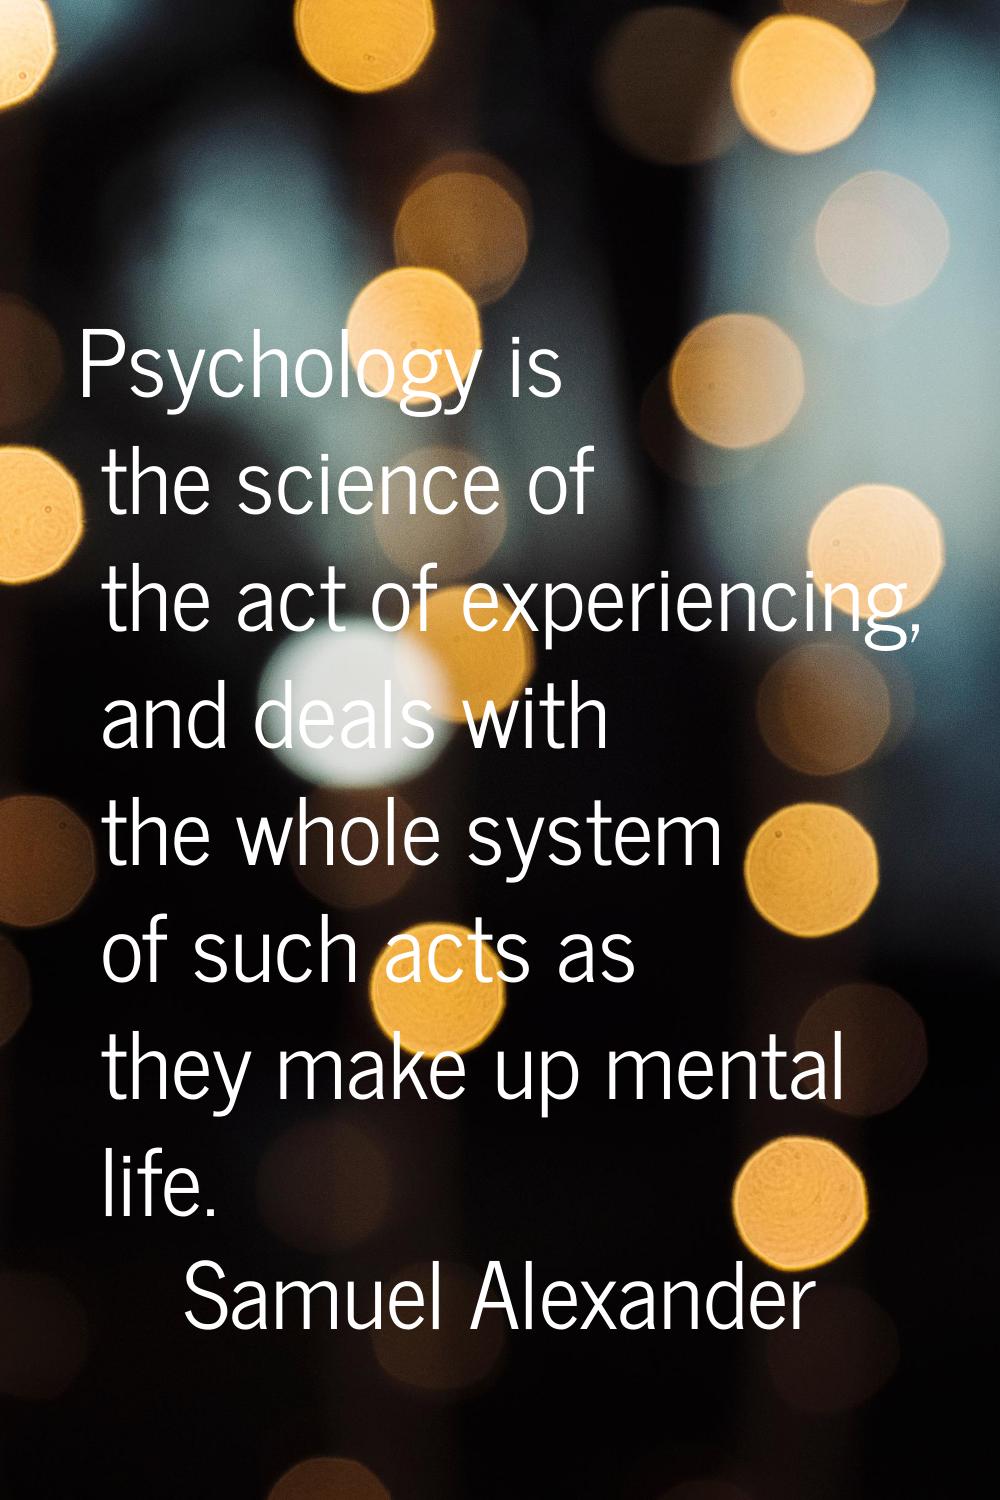 Psychology is the science of the act of experiencing, and deals with the whole system of such acts 